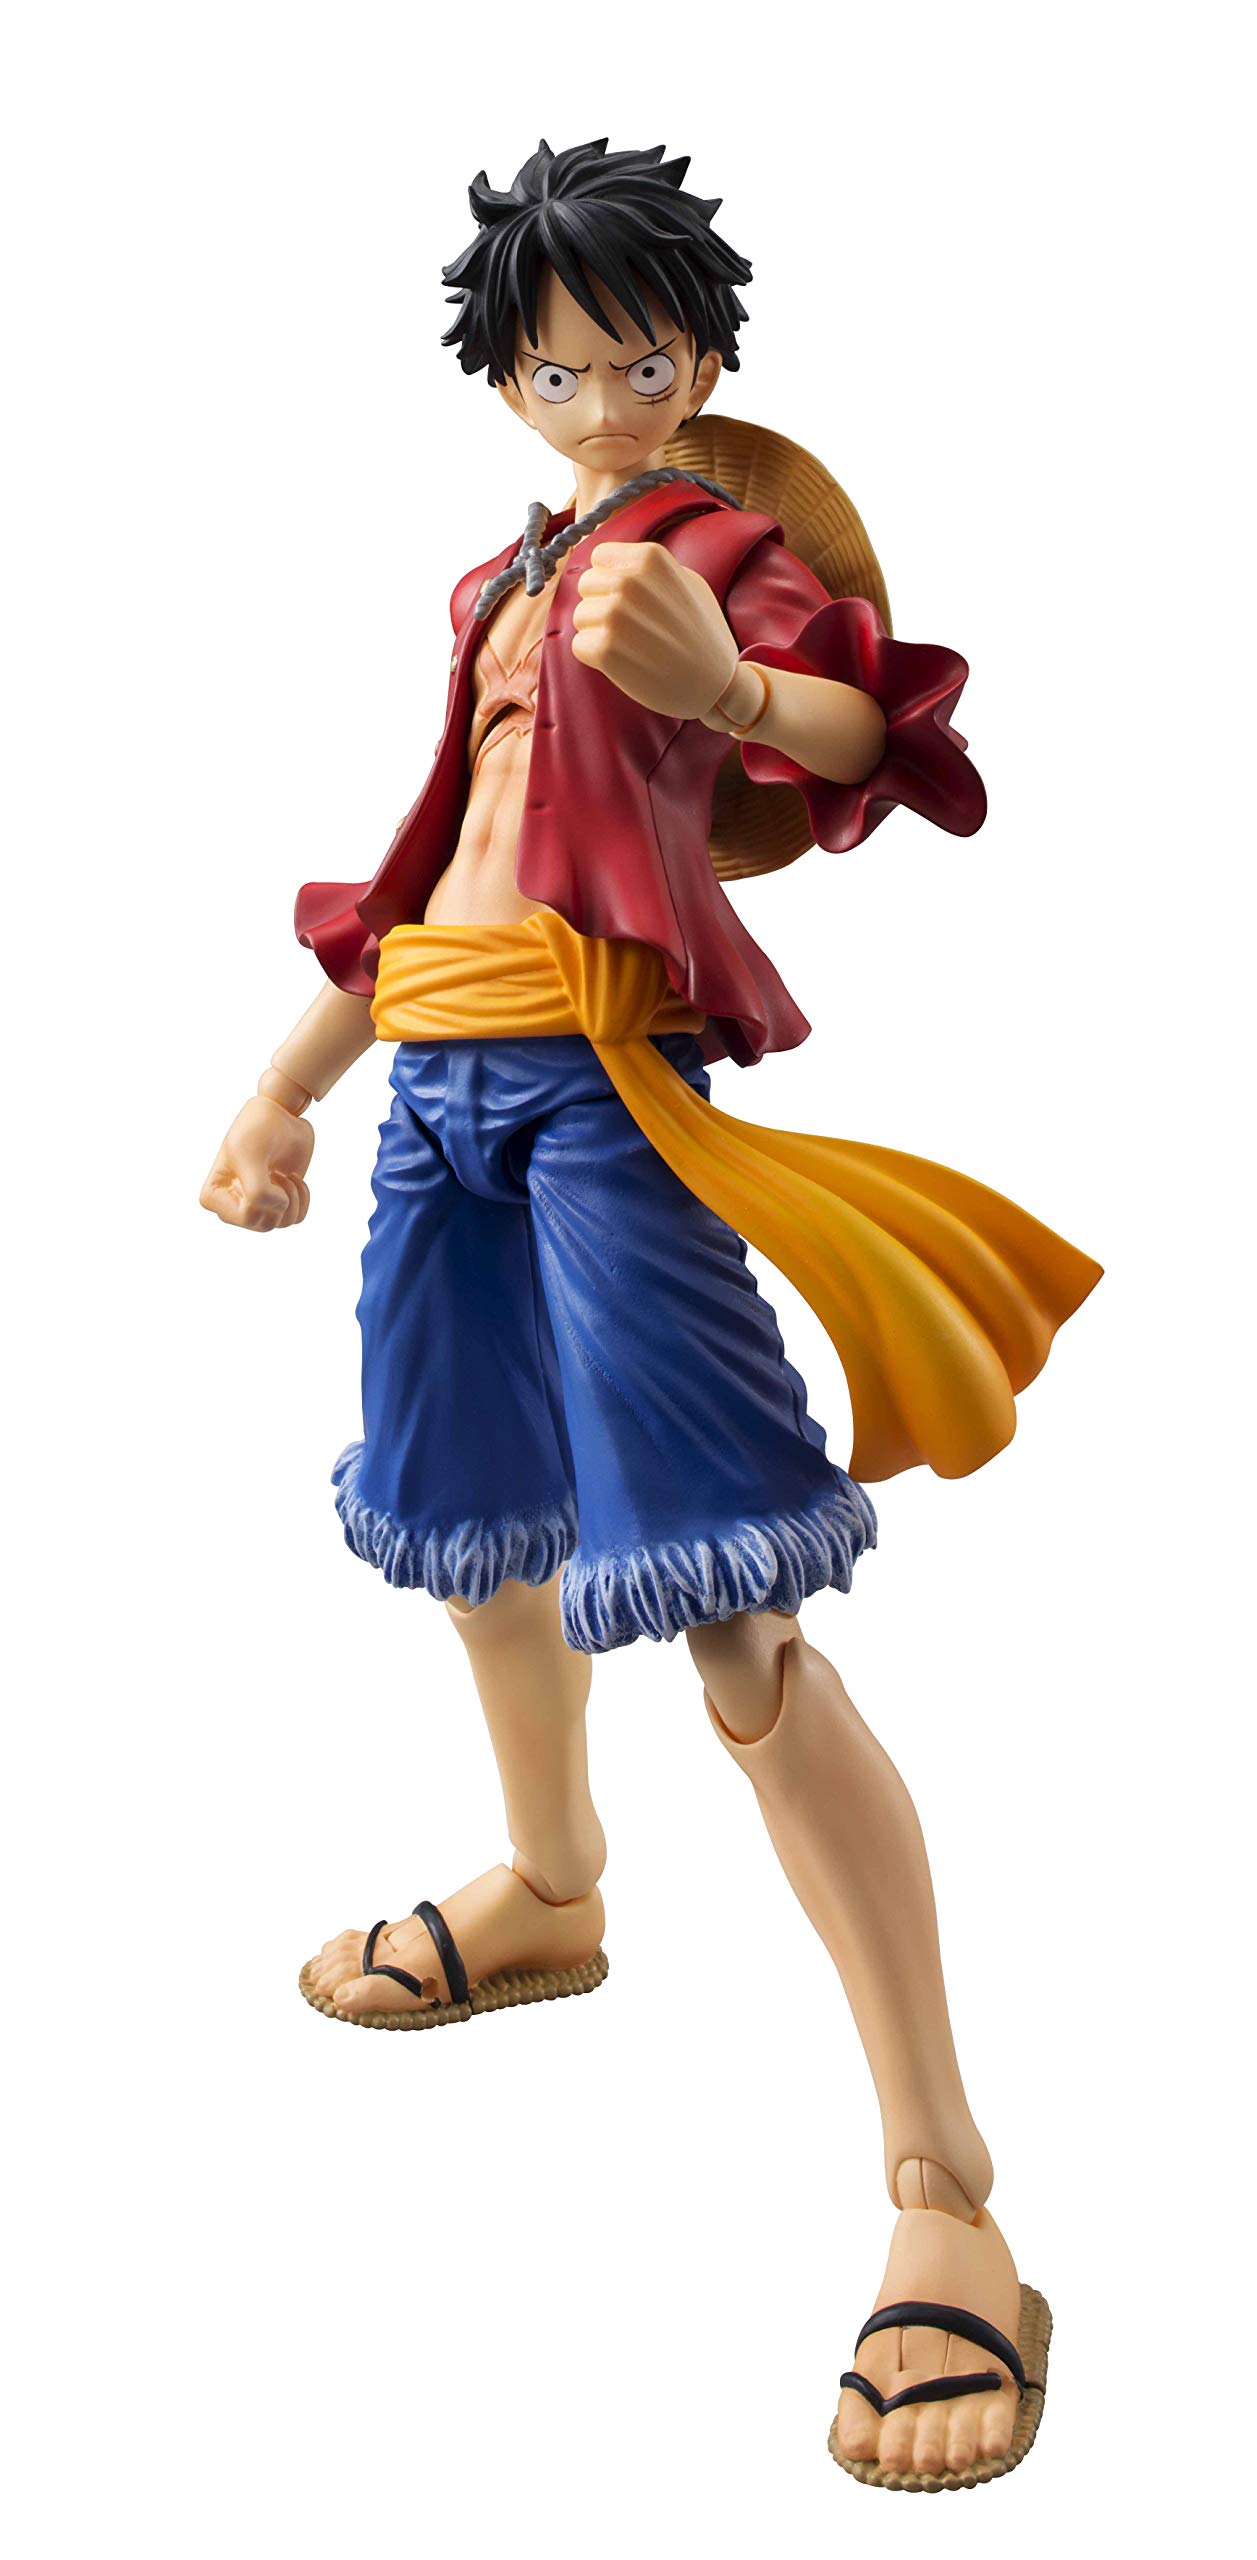 Megahouse One Piece Variable Action Heroes Action Figure Monkey D. Luffy 18cm